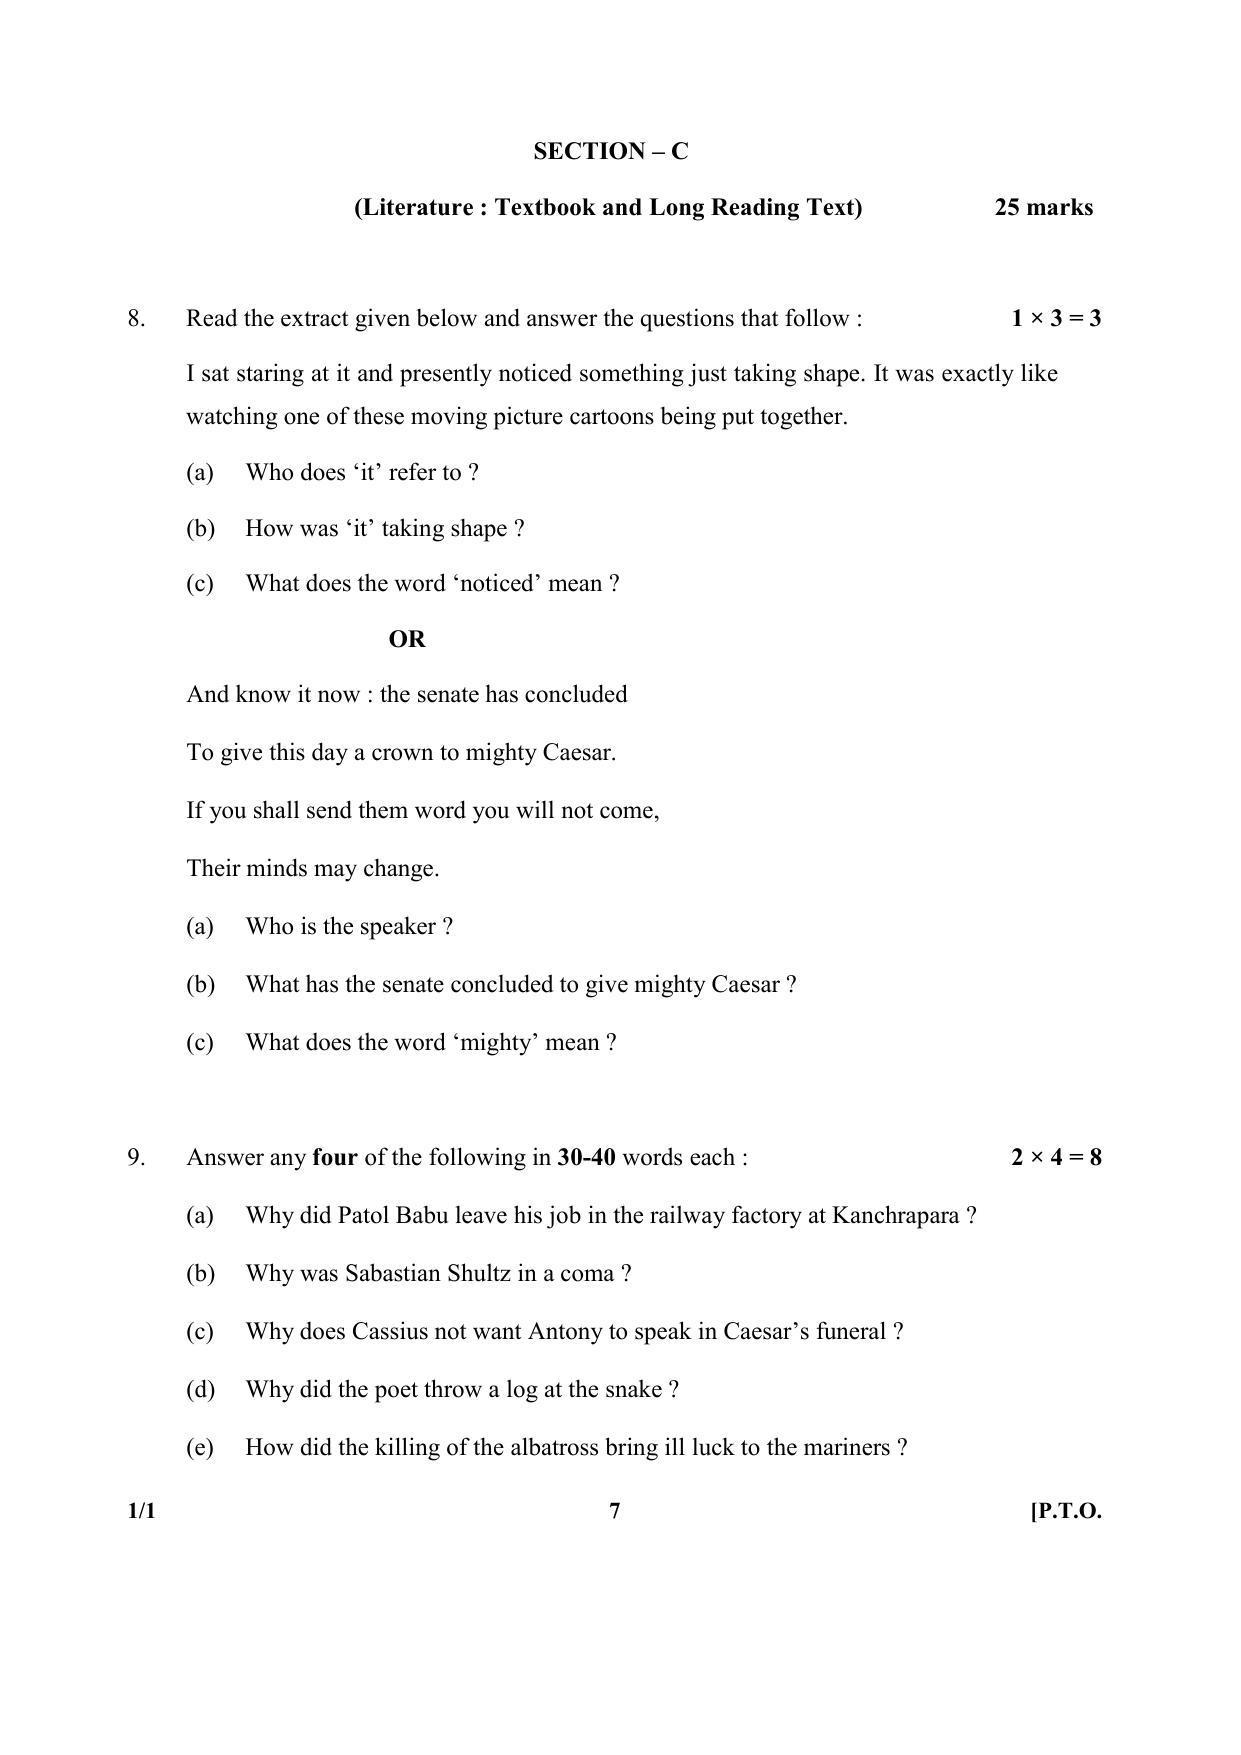 CBSE Class 10 1-1 (English) 2017-comptt Question Paper - Page 7